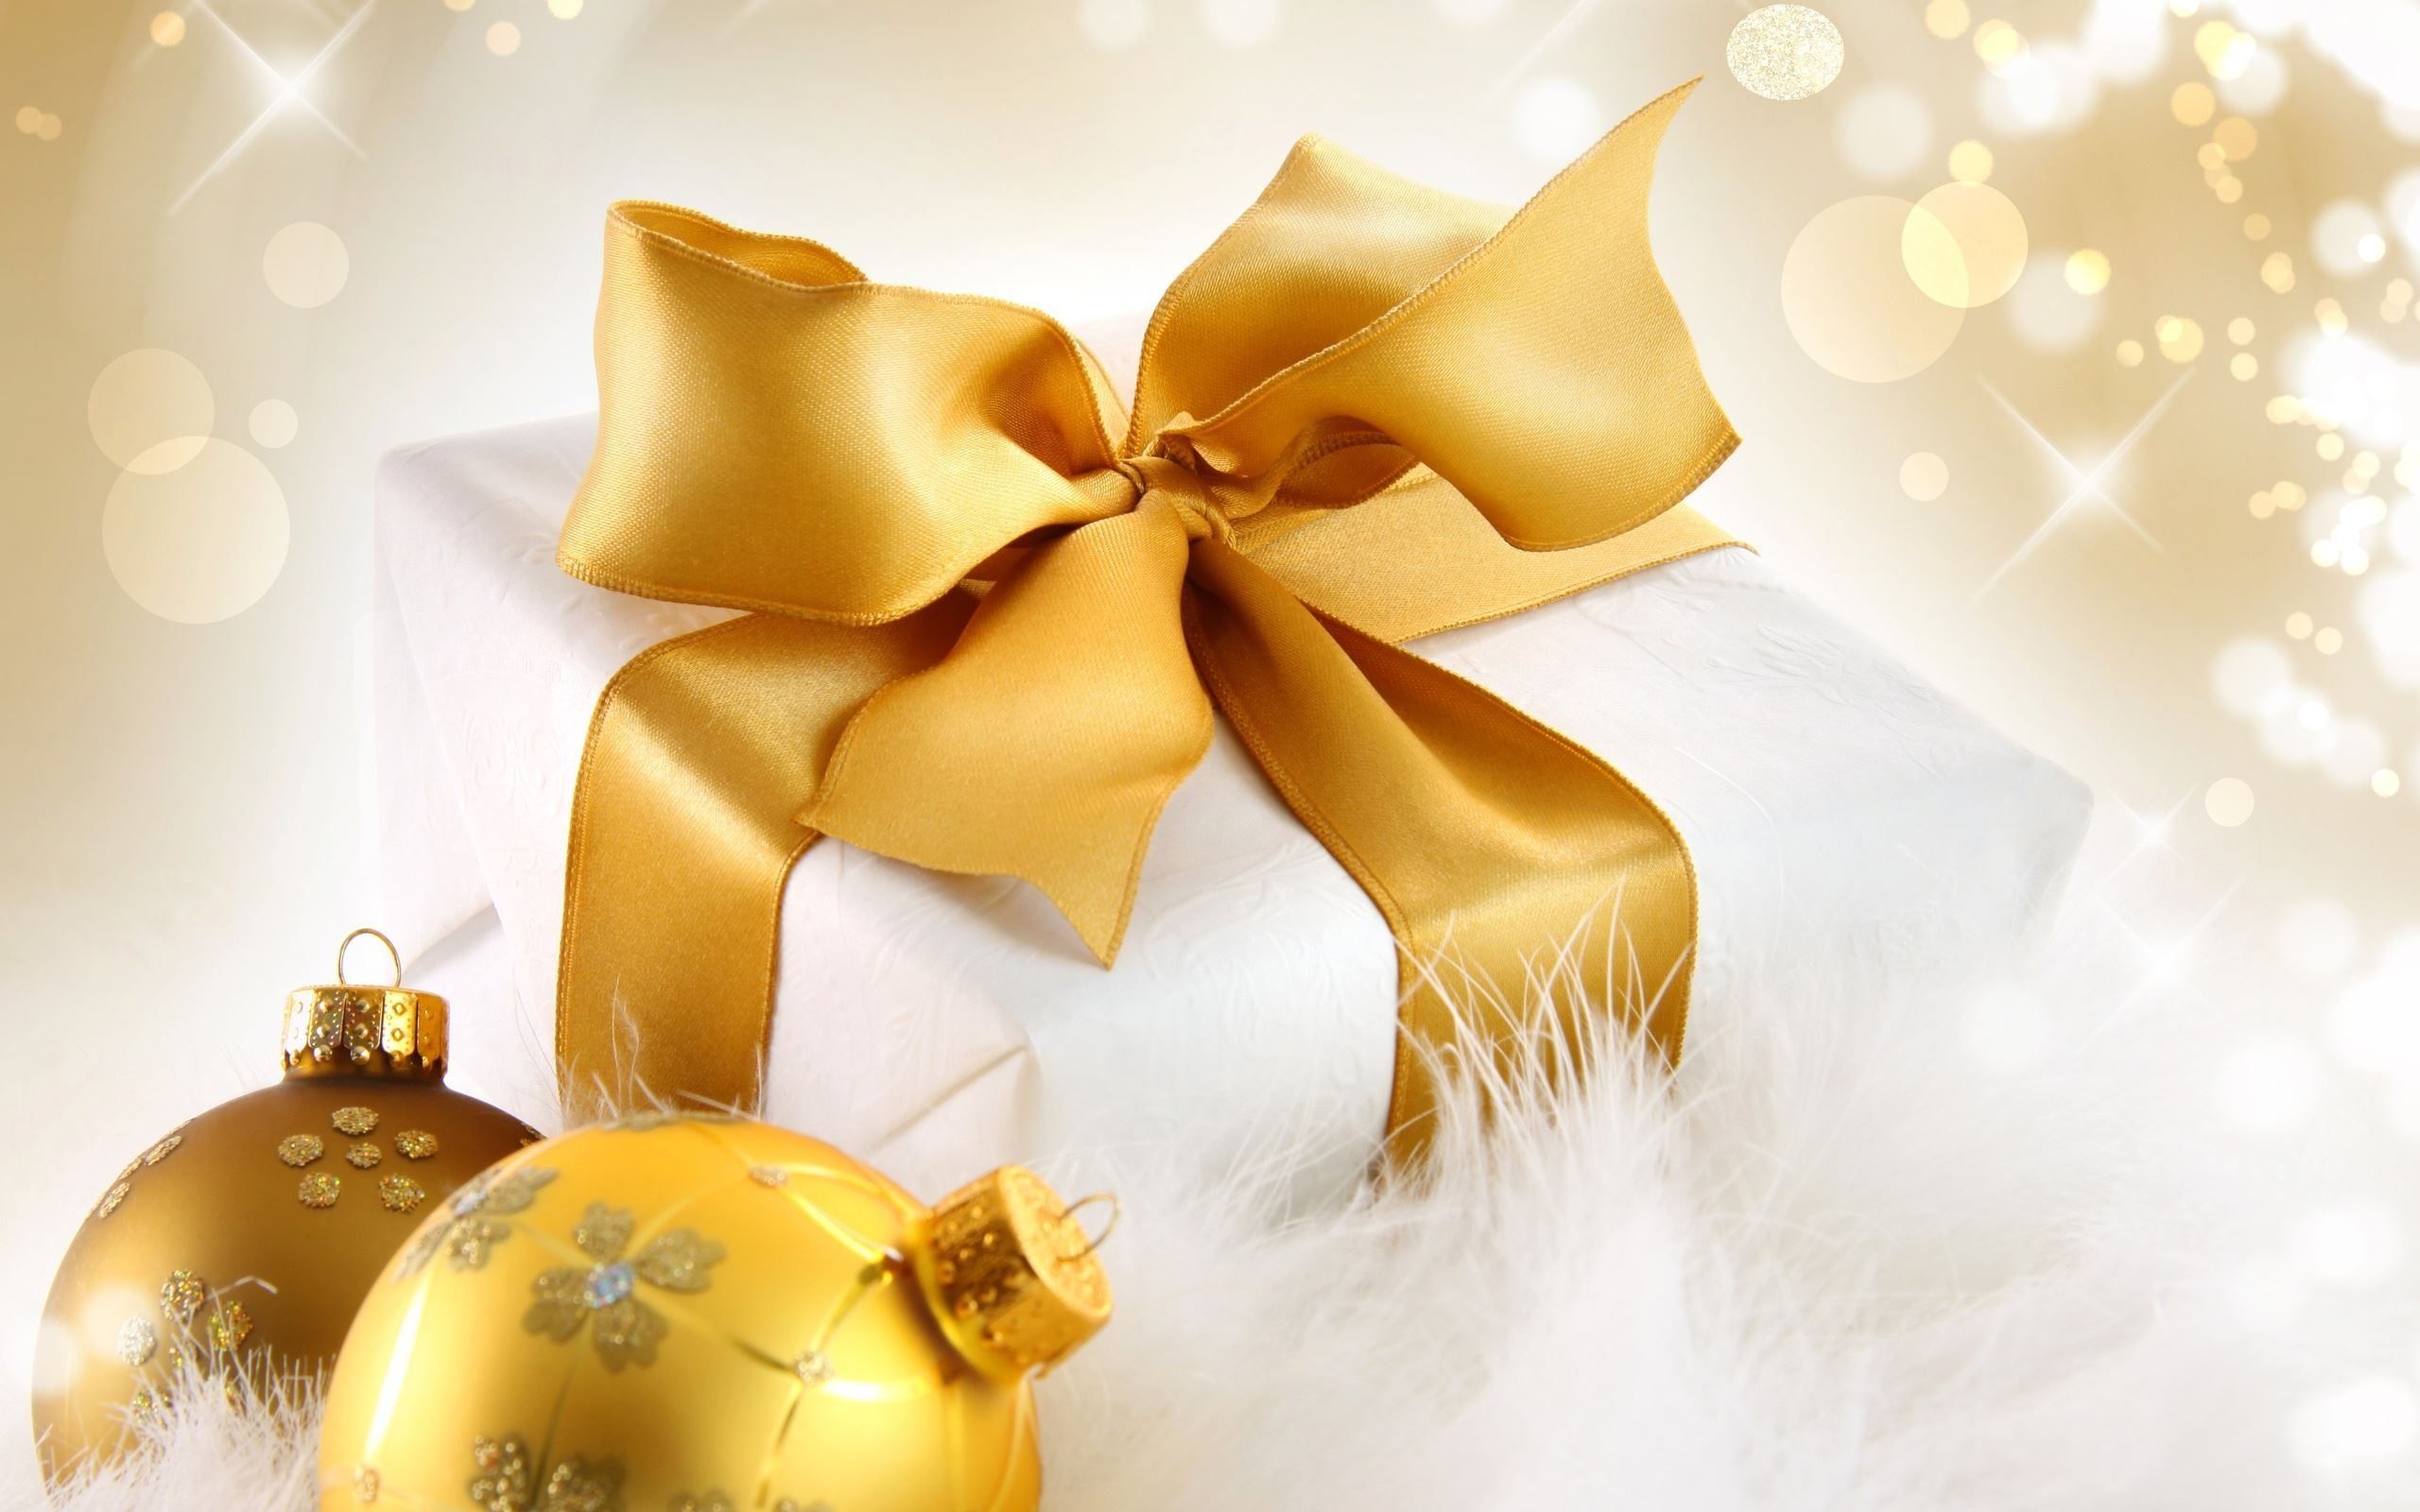 Christmas Gifts Background Wallpaper High Definition Quality